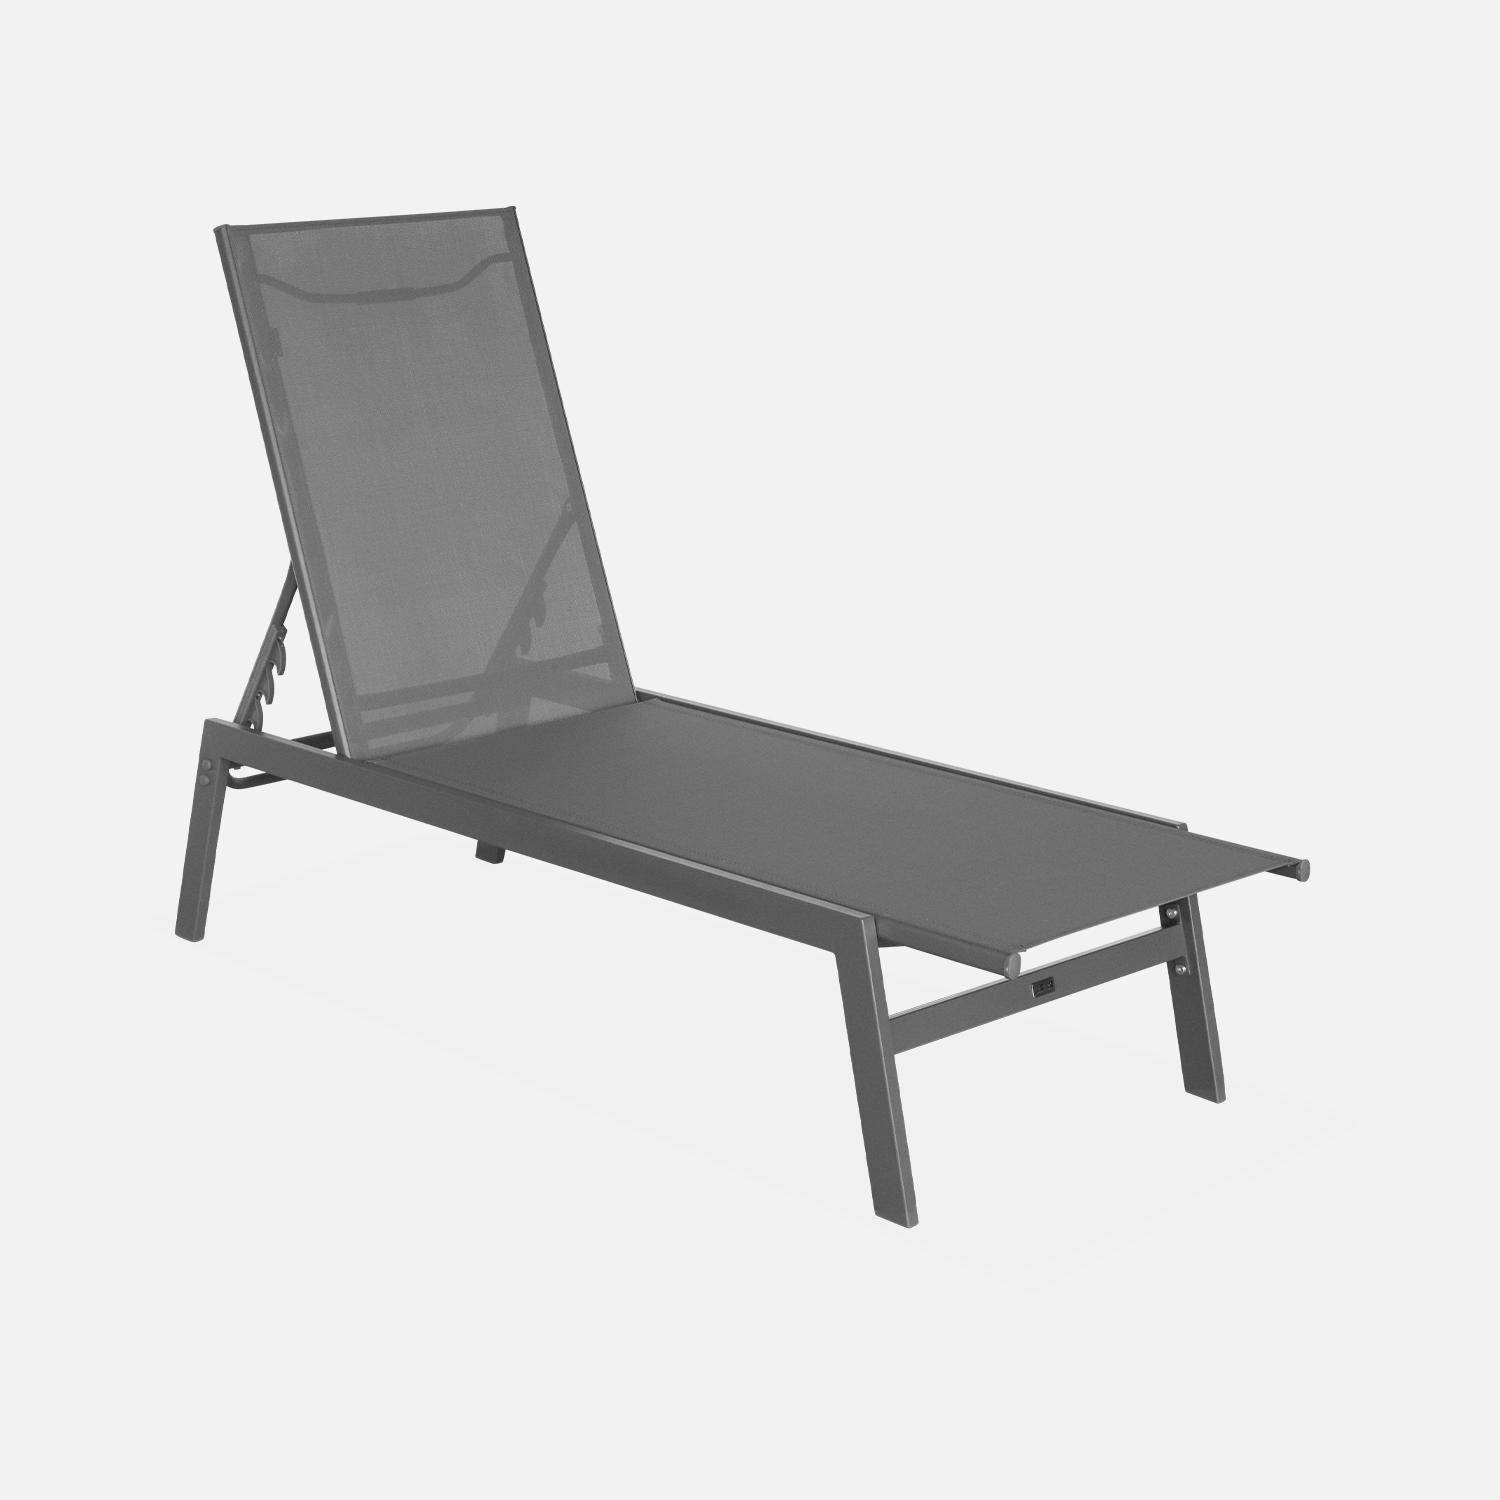 Pair of Textilene and Metal Multi-Position Sun Loungers, Anthracite,sweeek,Photo4